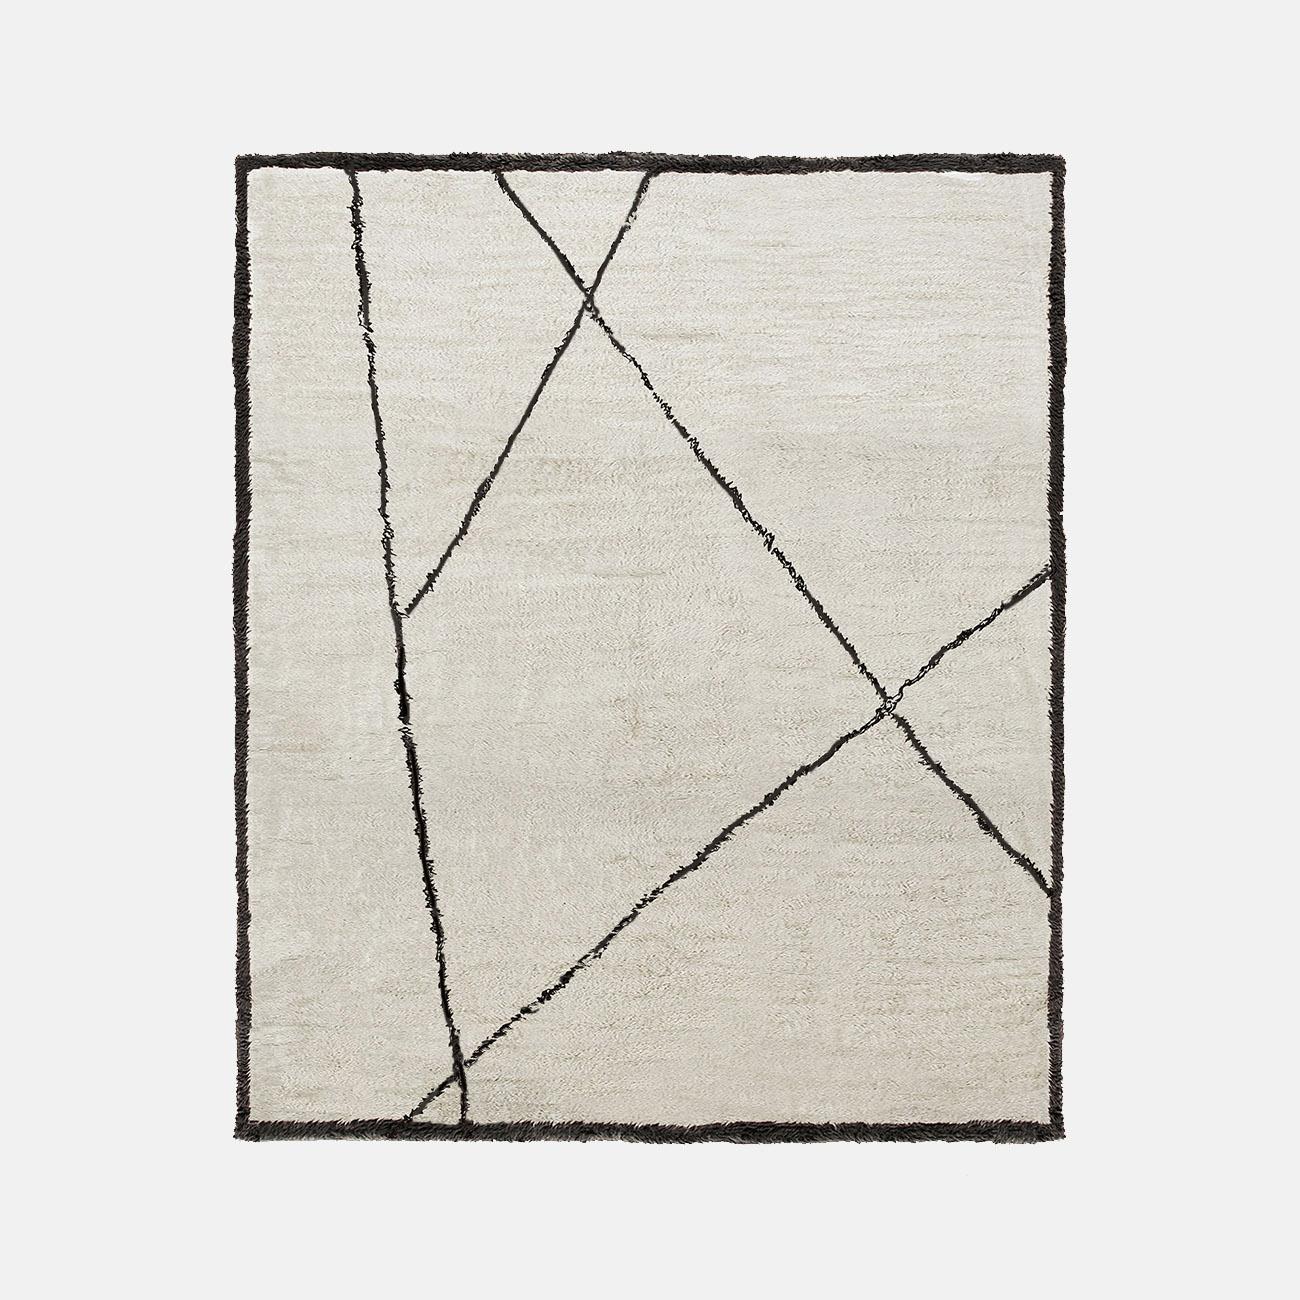 Kimoto Susu Rug by Atelier Bowy C.D.
Dimensions: W 243 x L 350 cm.
Materials: Wool, silk.

Available in D170, D200, D240, W140 x L220, W170 x L240, W210 x L300, W243 x L350 cm.

Atelier Bowy C.D. is dedicated to crafting contemporary handmade rugs